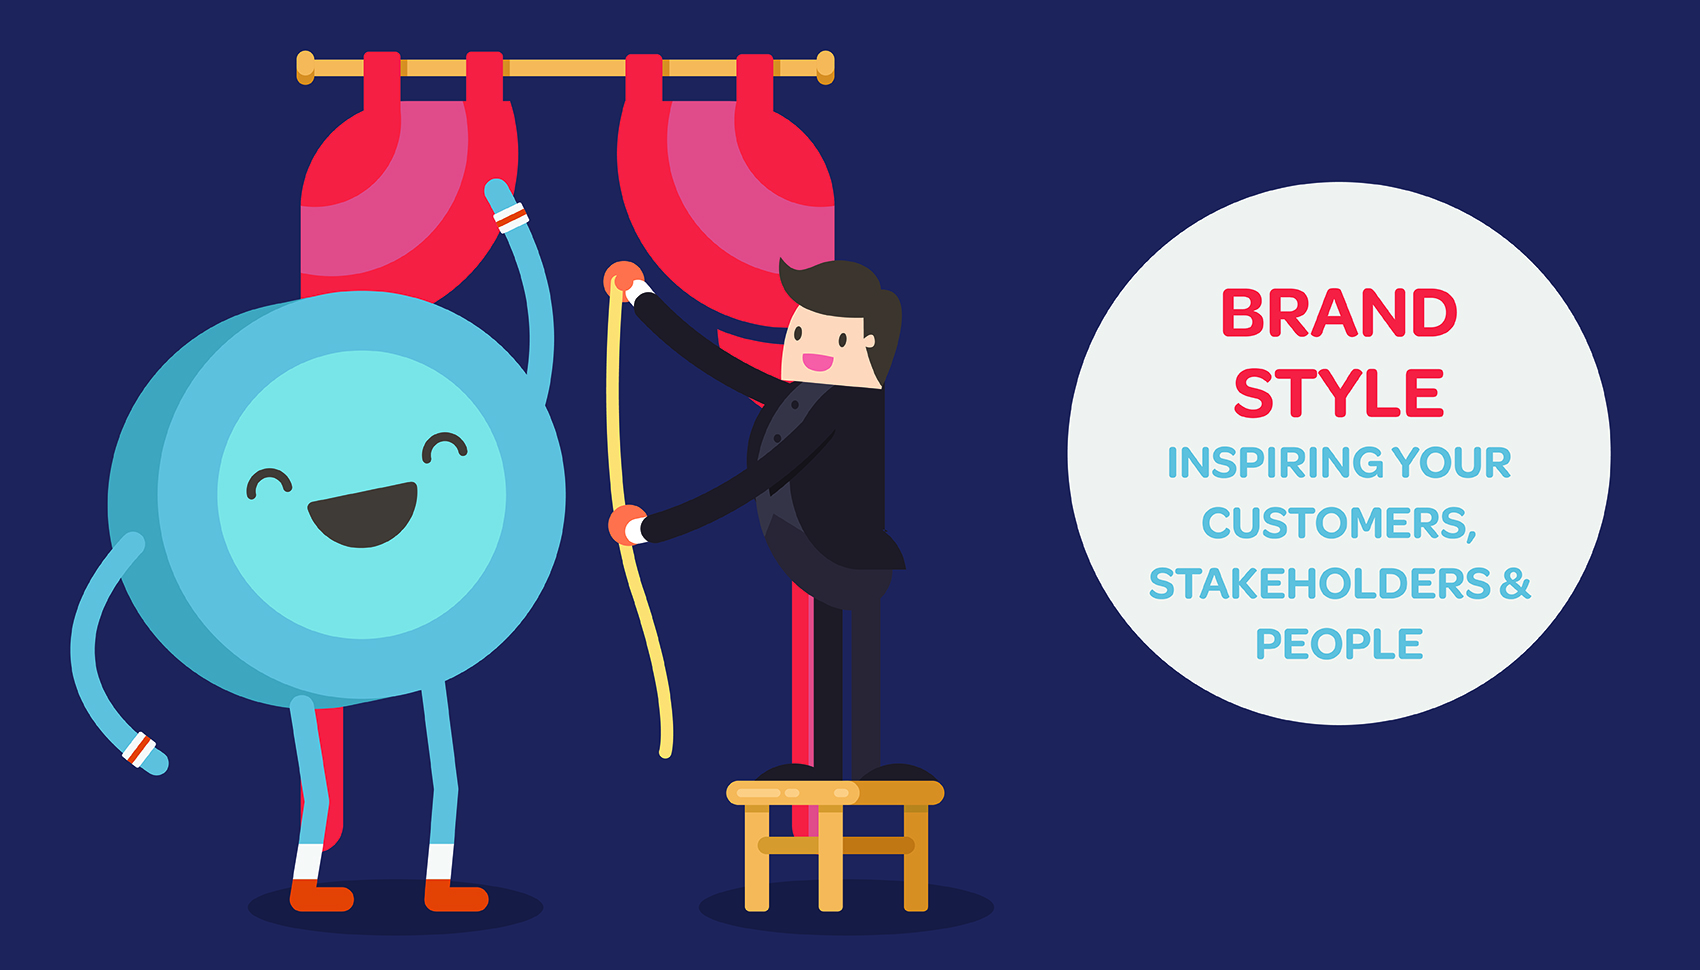 Brand Style - Inspiring your customers, stakeholders & people